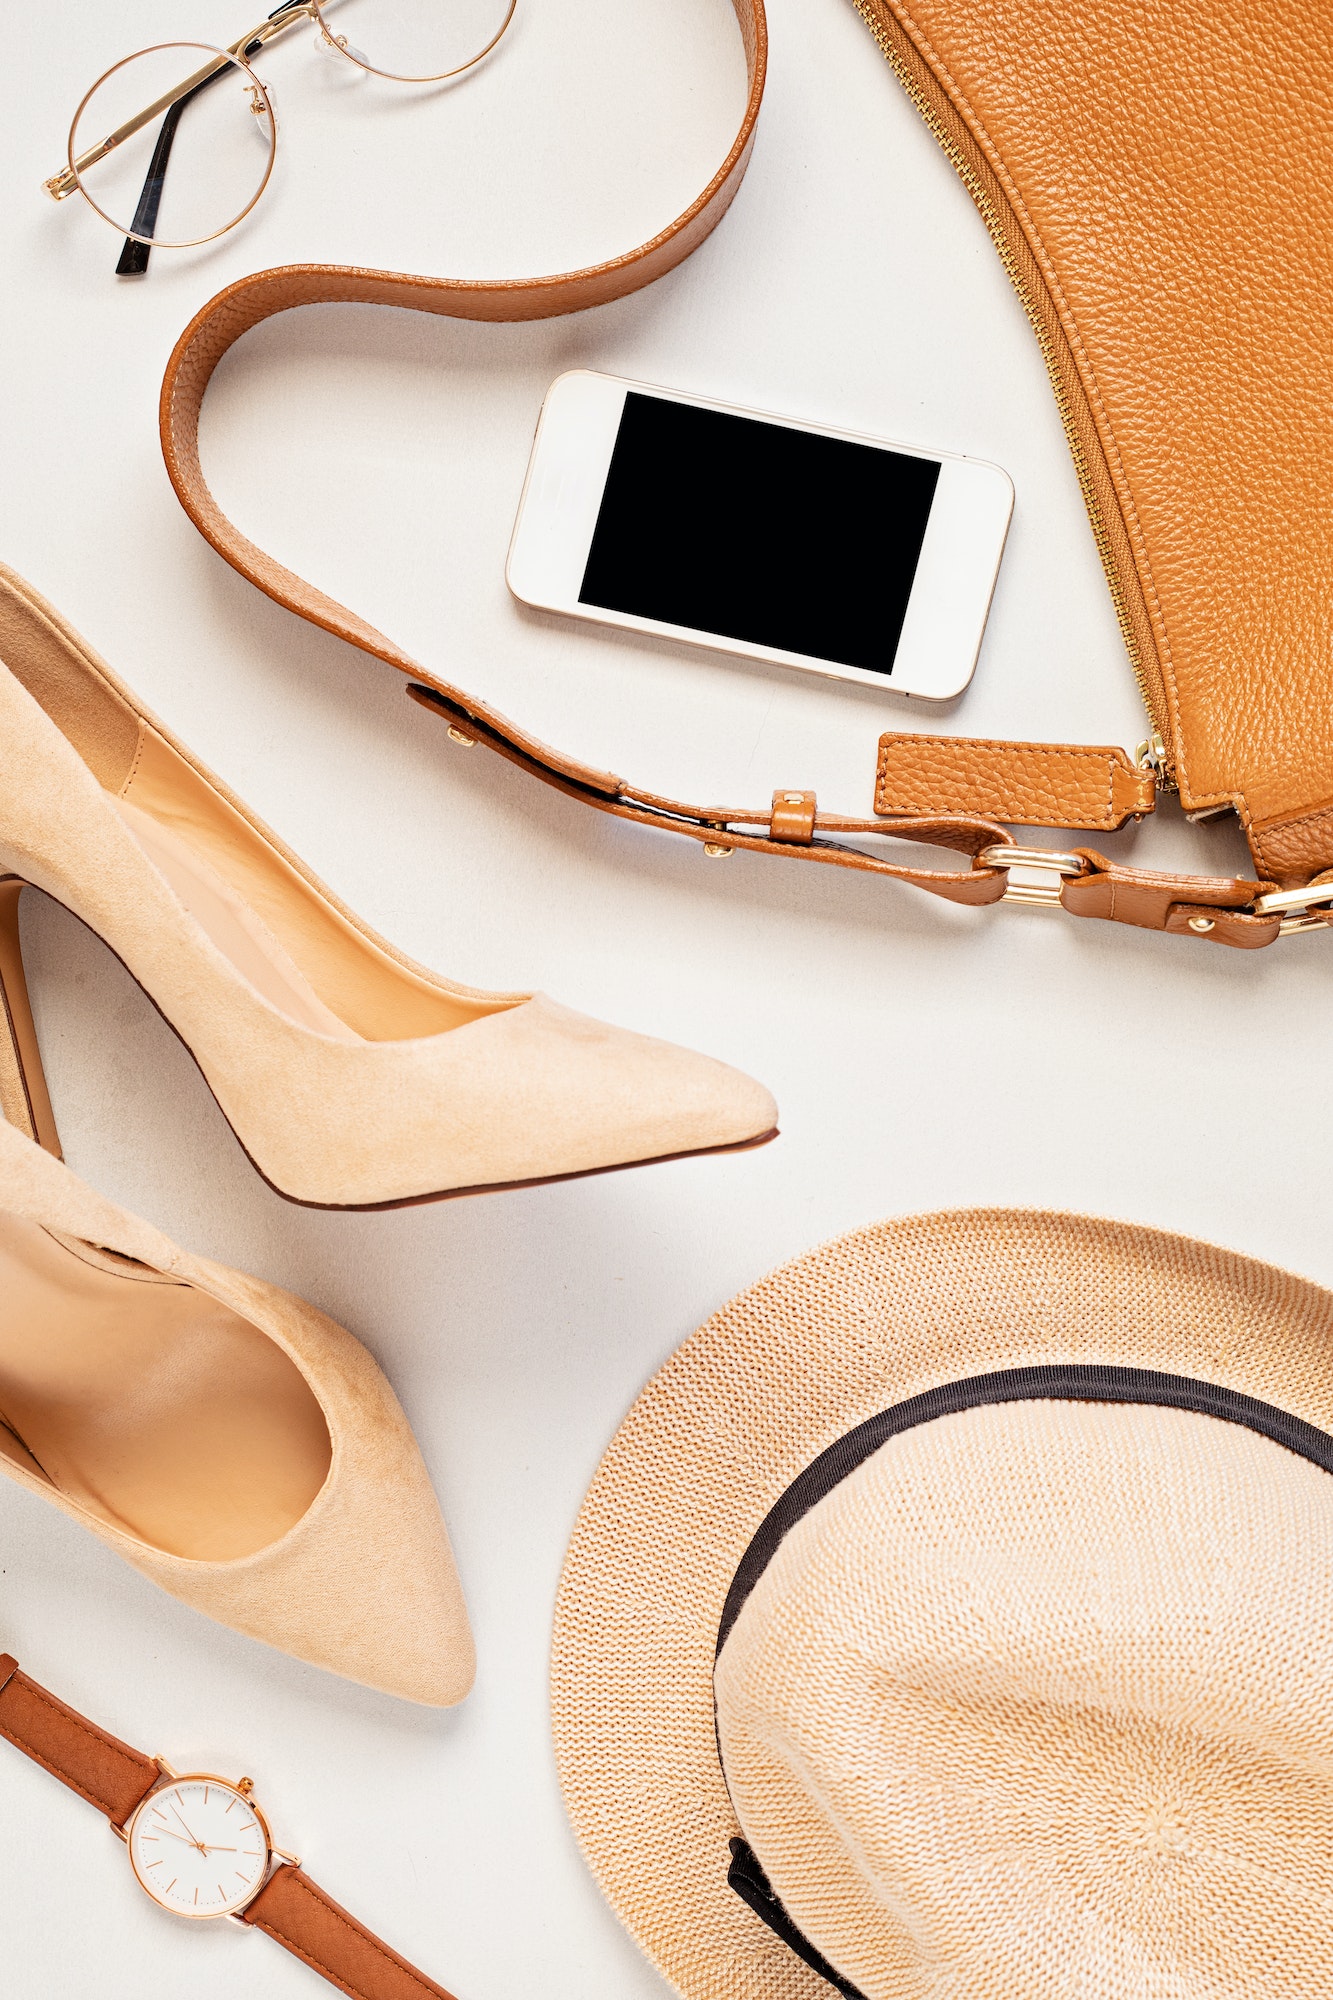 Flat lay with woman fashion accessories in neutral colors. Beauty blog, style, trends